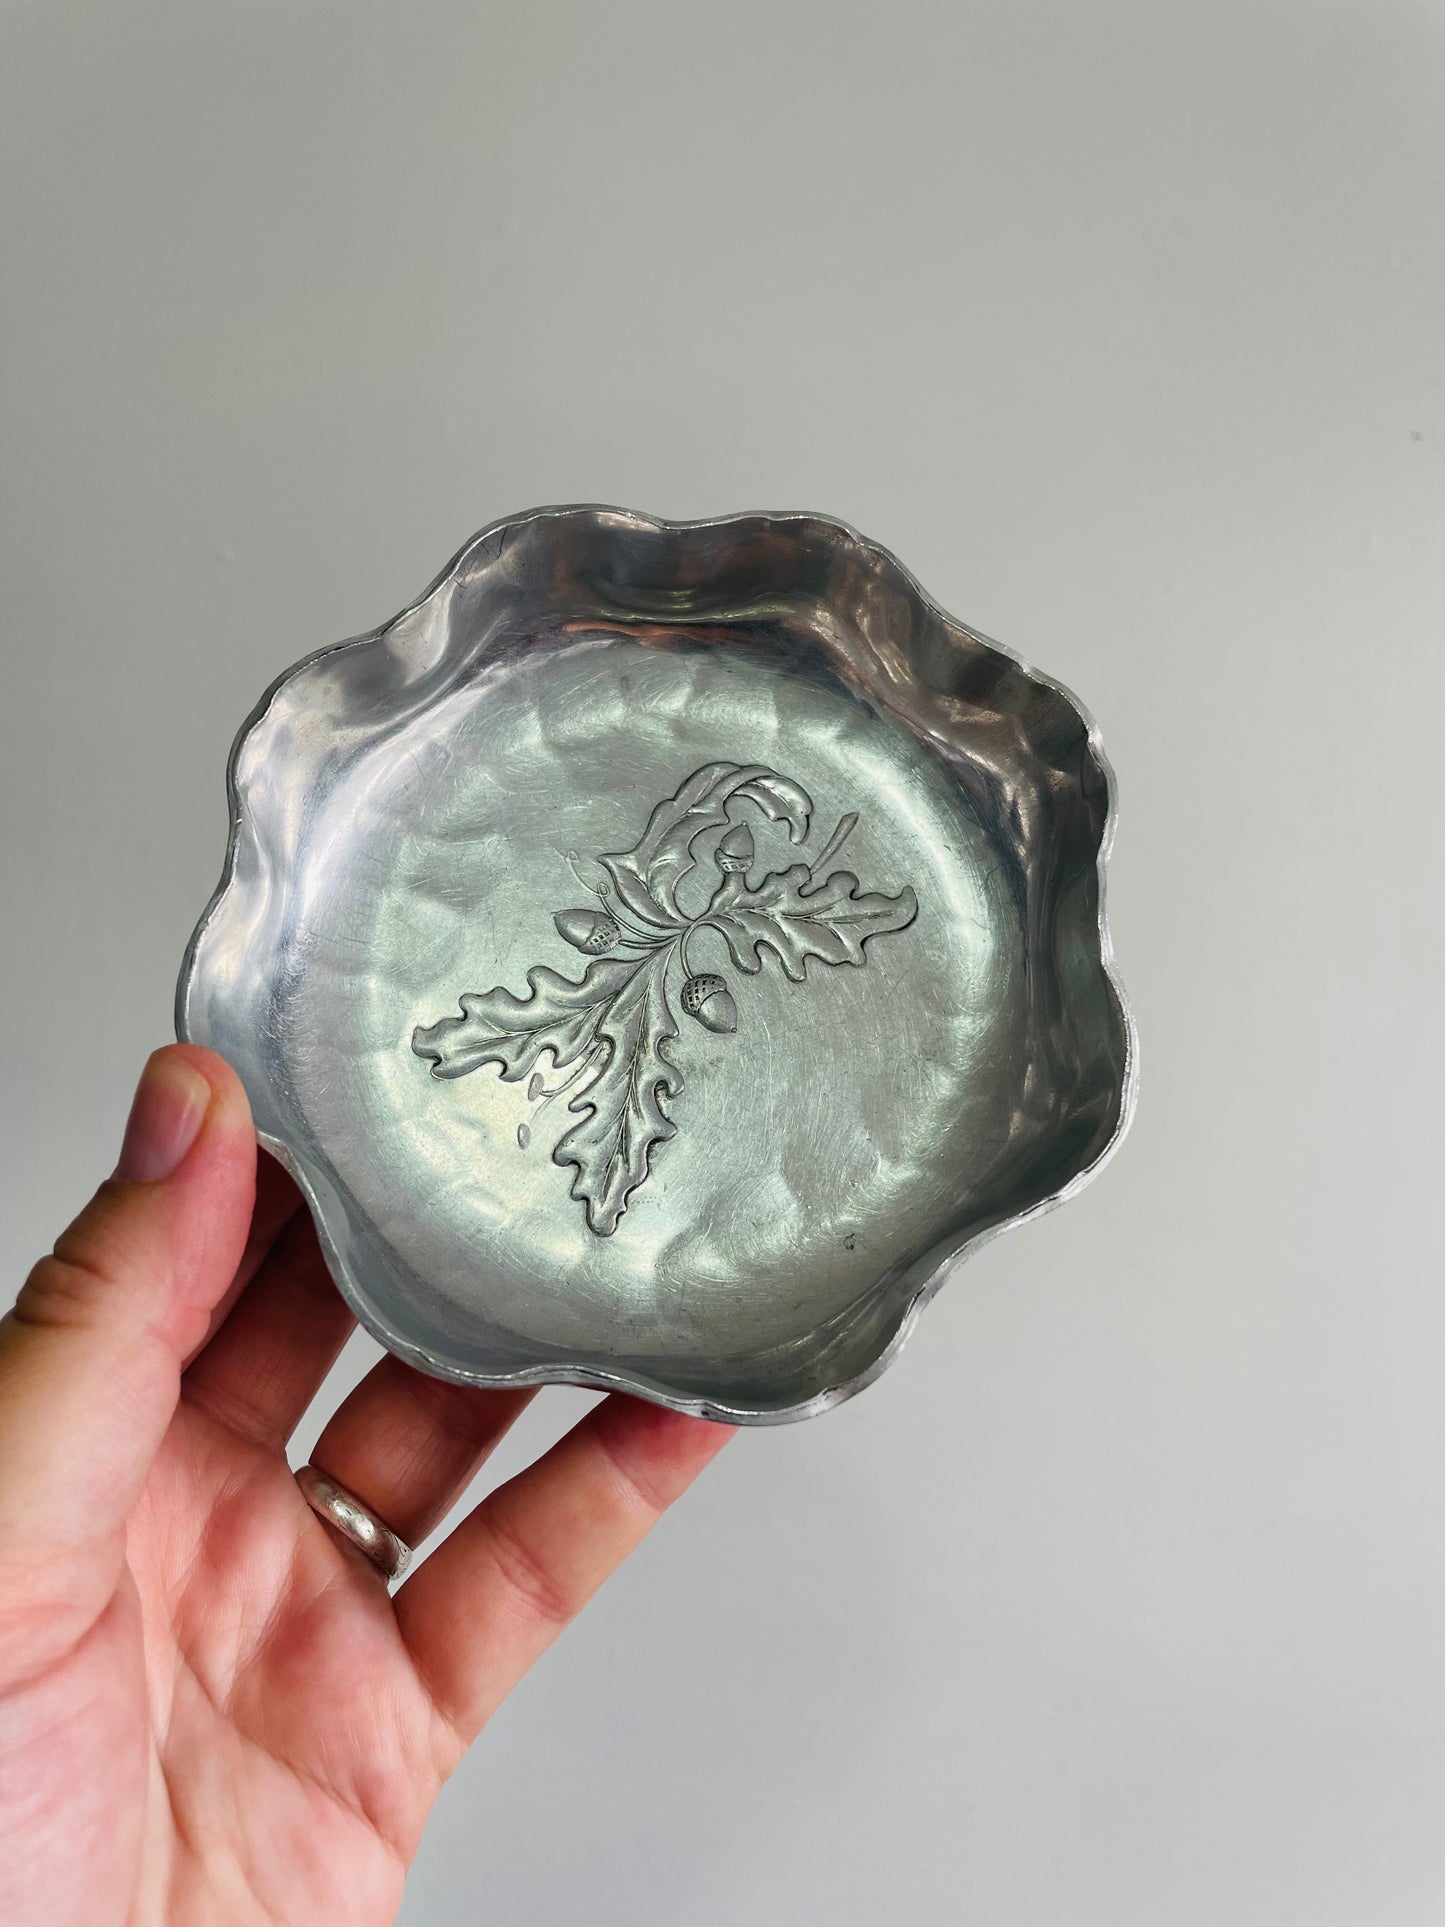 Alfred Day Hammered Aluminium Bowls - Plain or Acorn Design - Sold Individually (3 Available)